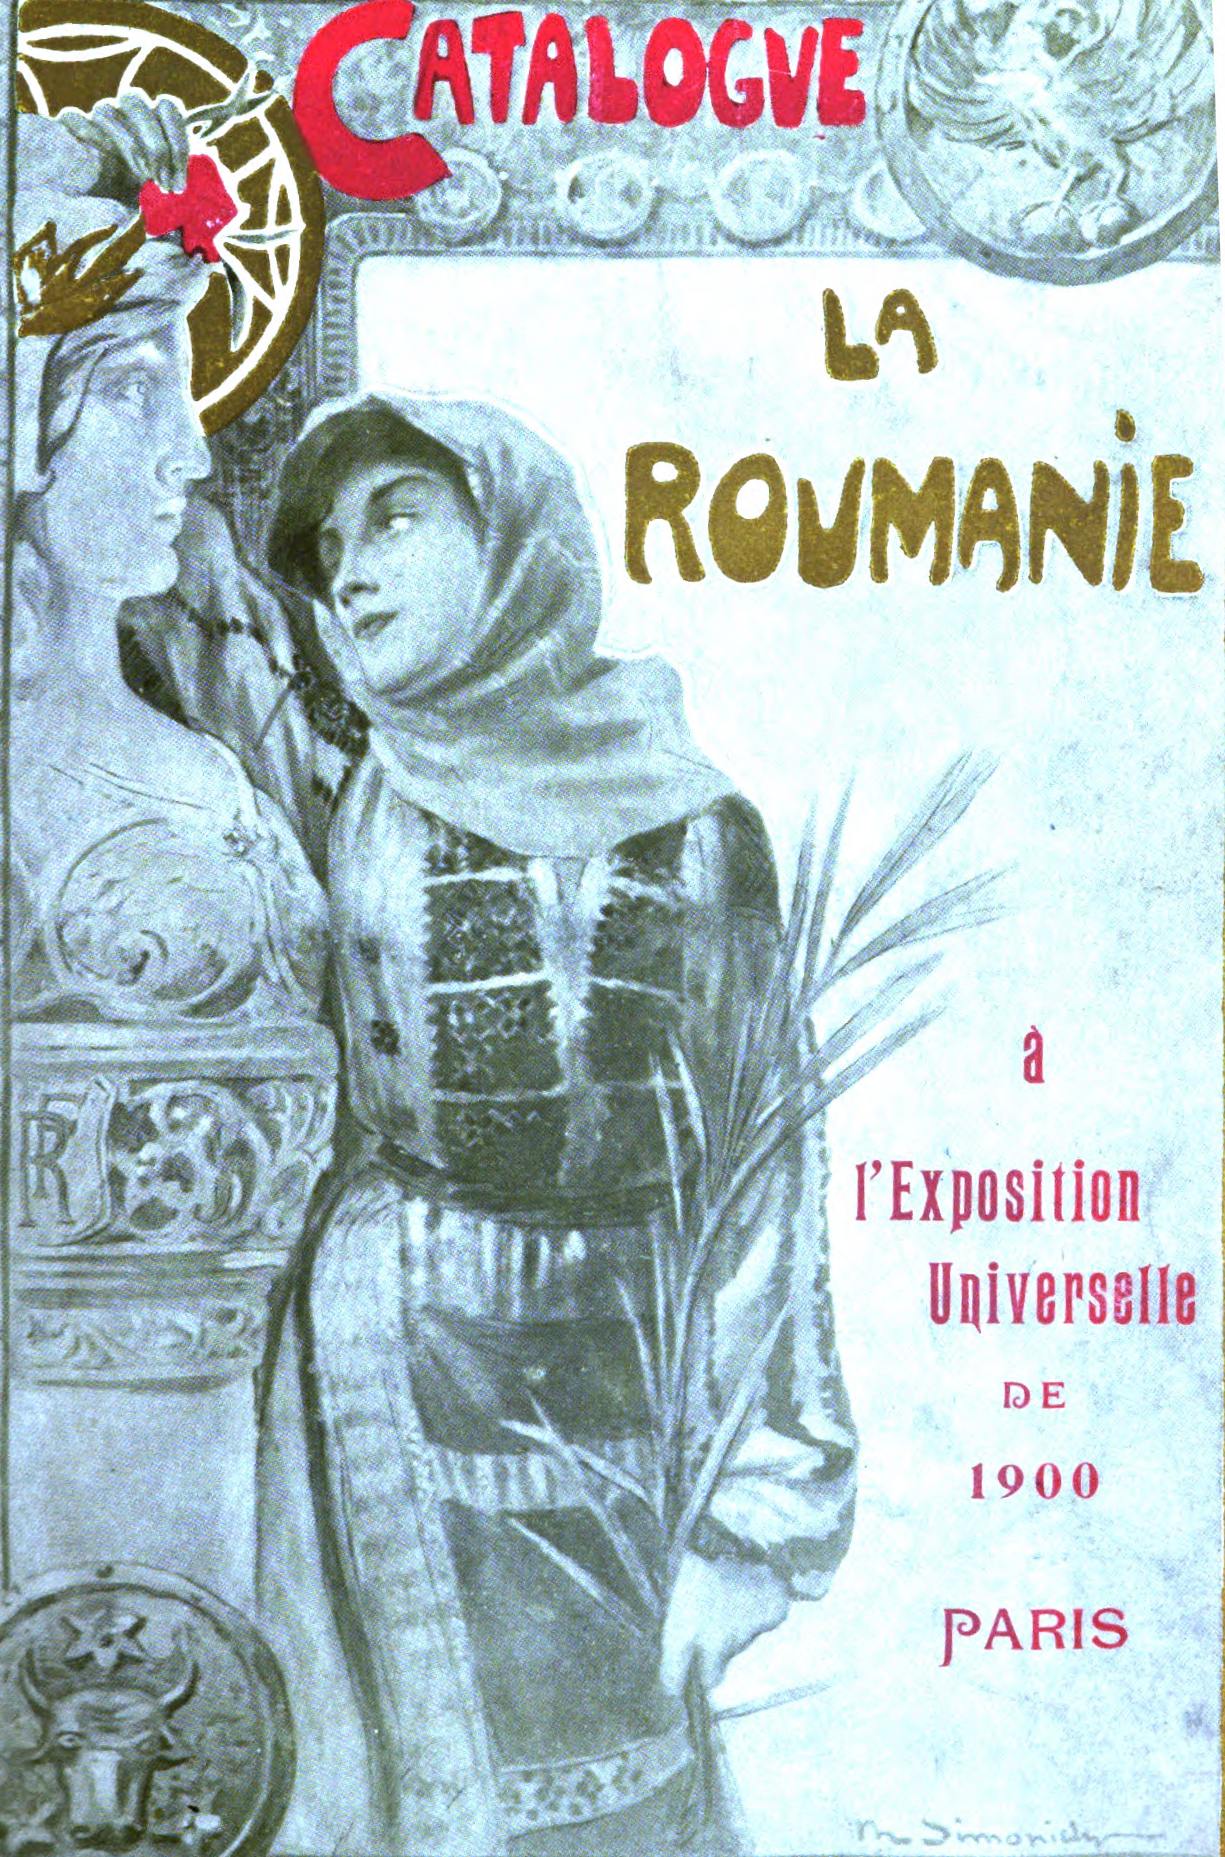 An image of a woman leaning against and staring at a marble sculpture of a figure. In her left hand is a branch from a plant. On the image there is writing that says &ldquo;CATALOGUE LA ROUMANIE&rdquo;